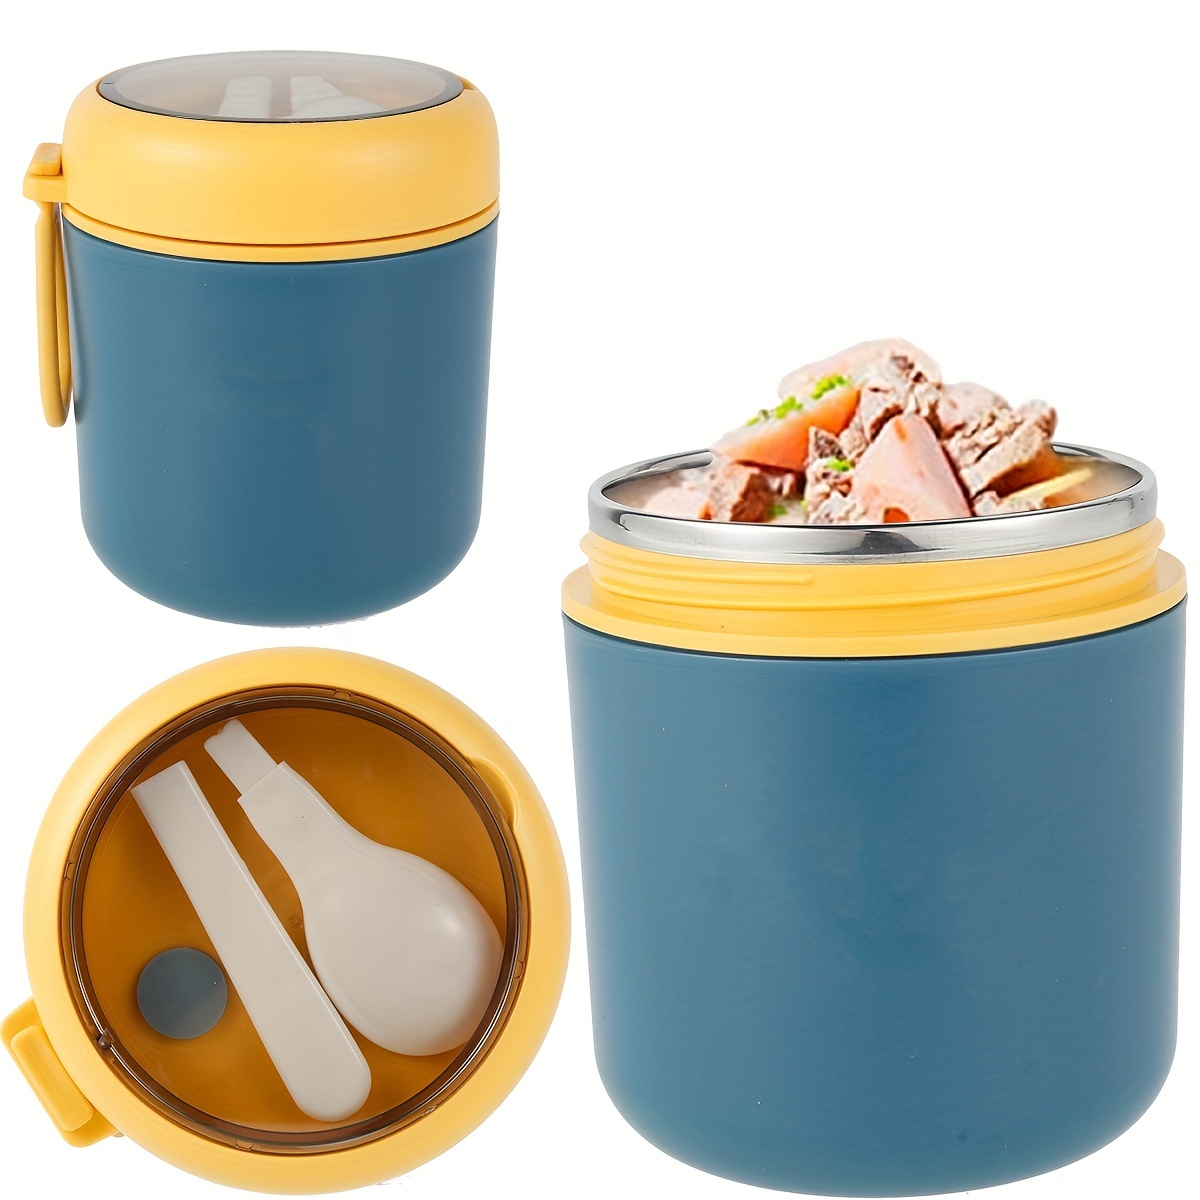 22oz Stainless Steel Insulated Food Container with Handles - Cold and Hot  Food Storage for Lunch, Travel (Blue)